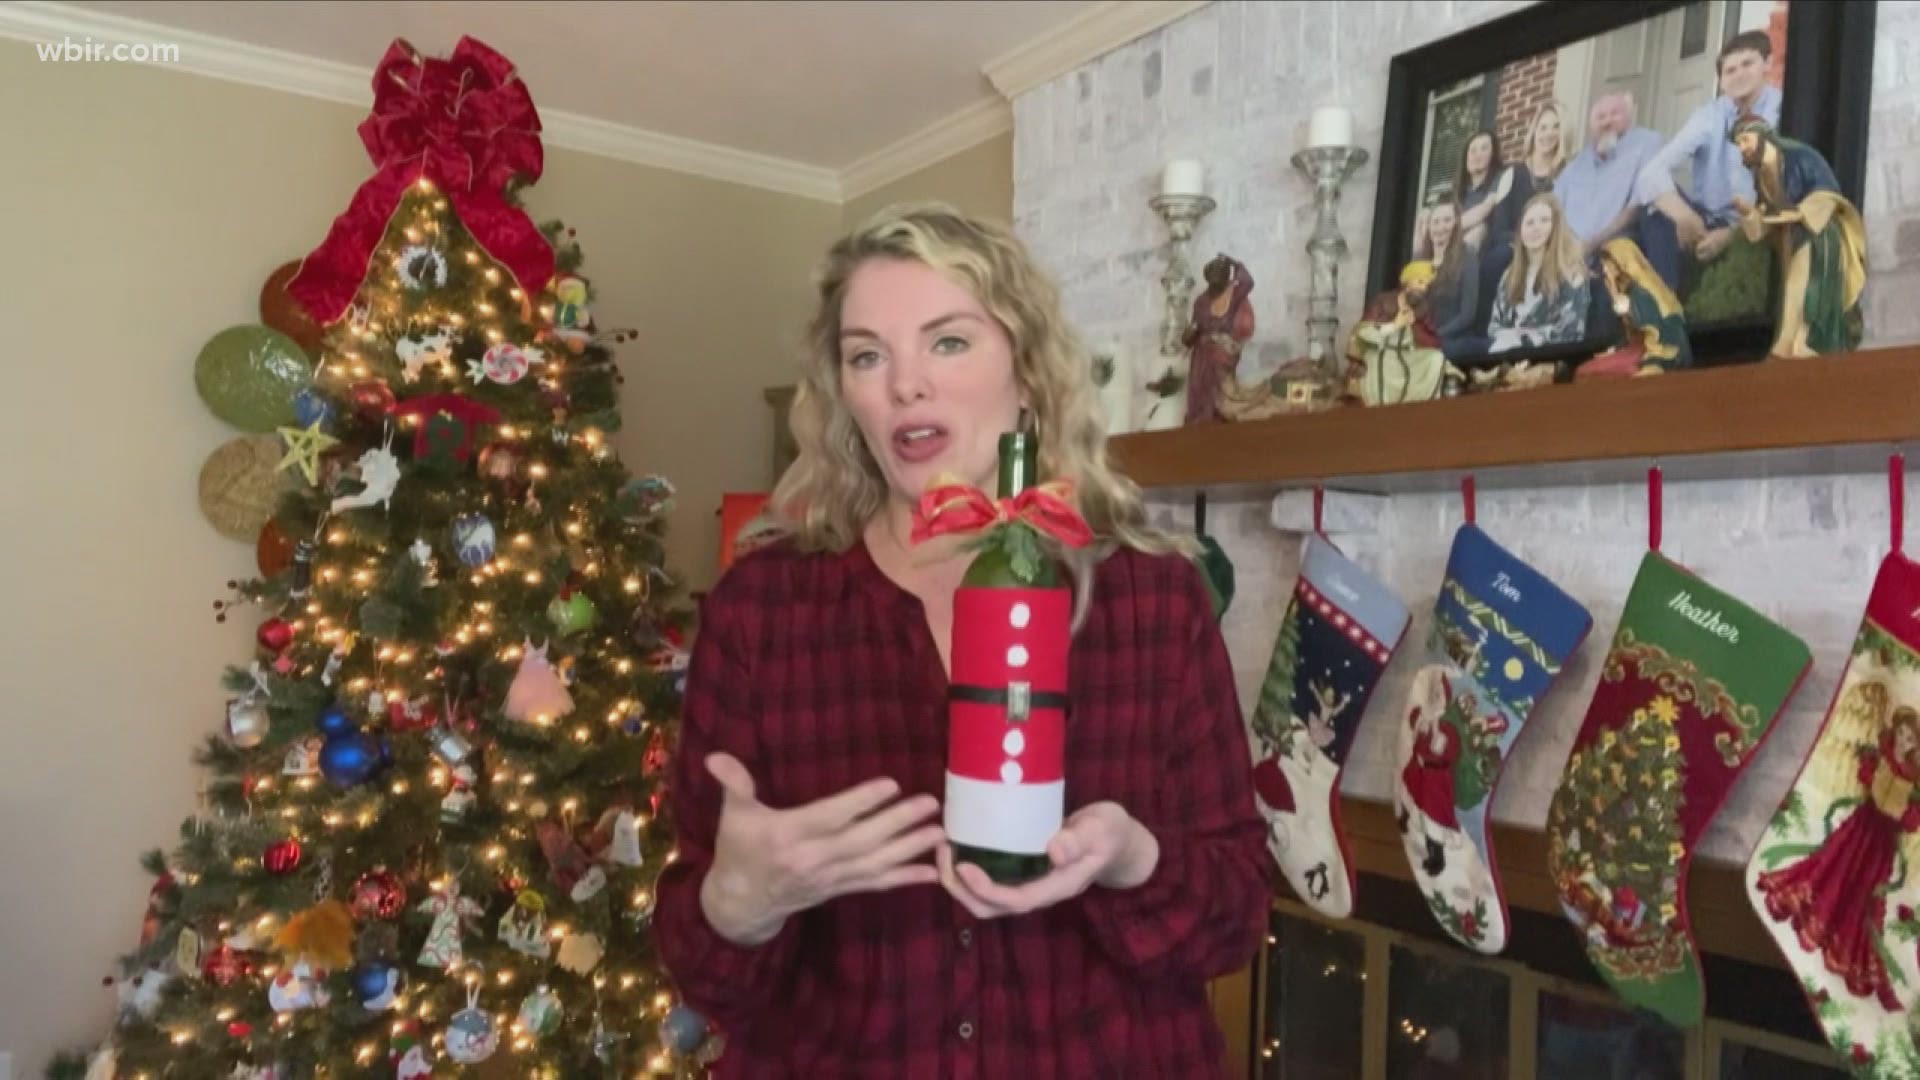 Heather Kyle-Harmon has some ways you can use items you already have at your house to get into the holiday spirit.